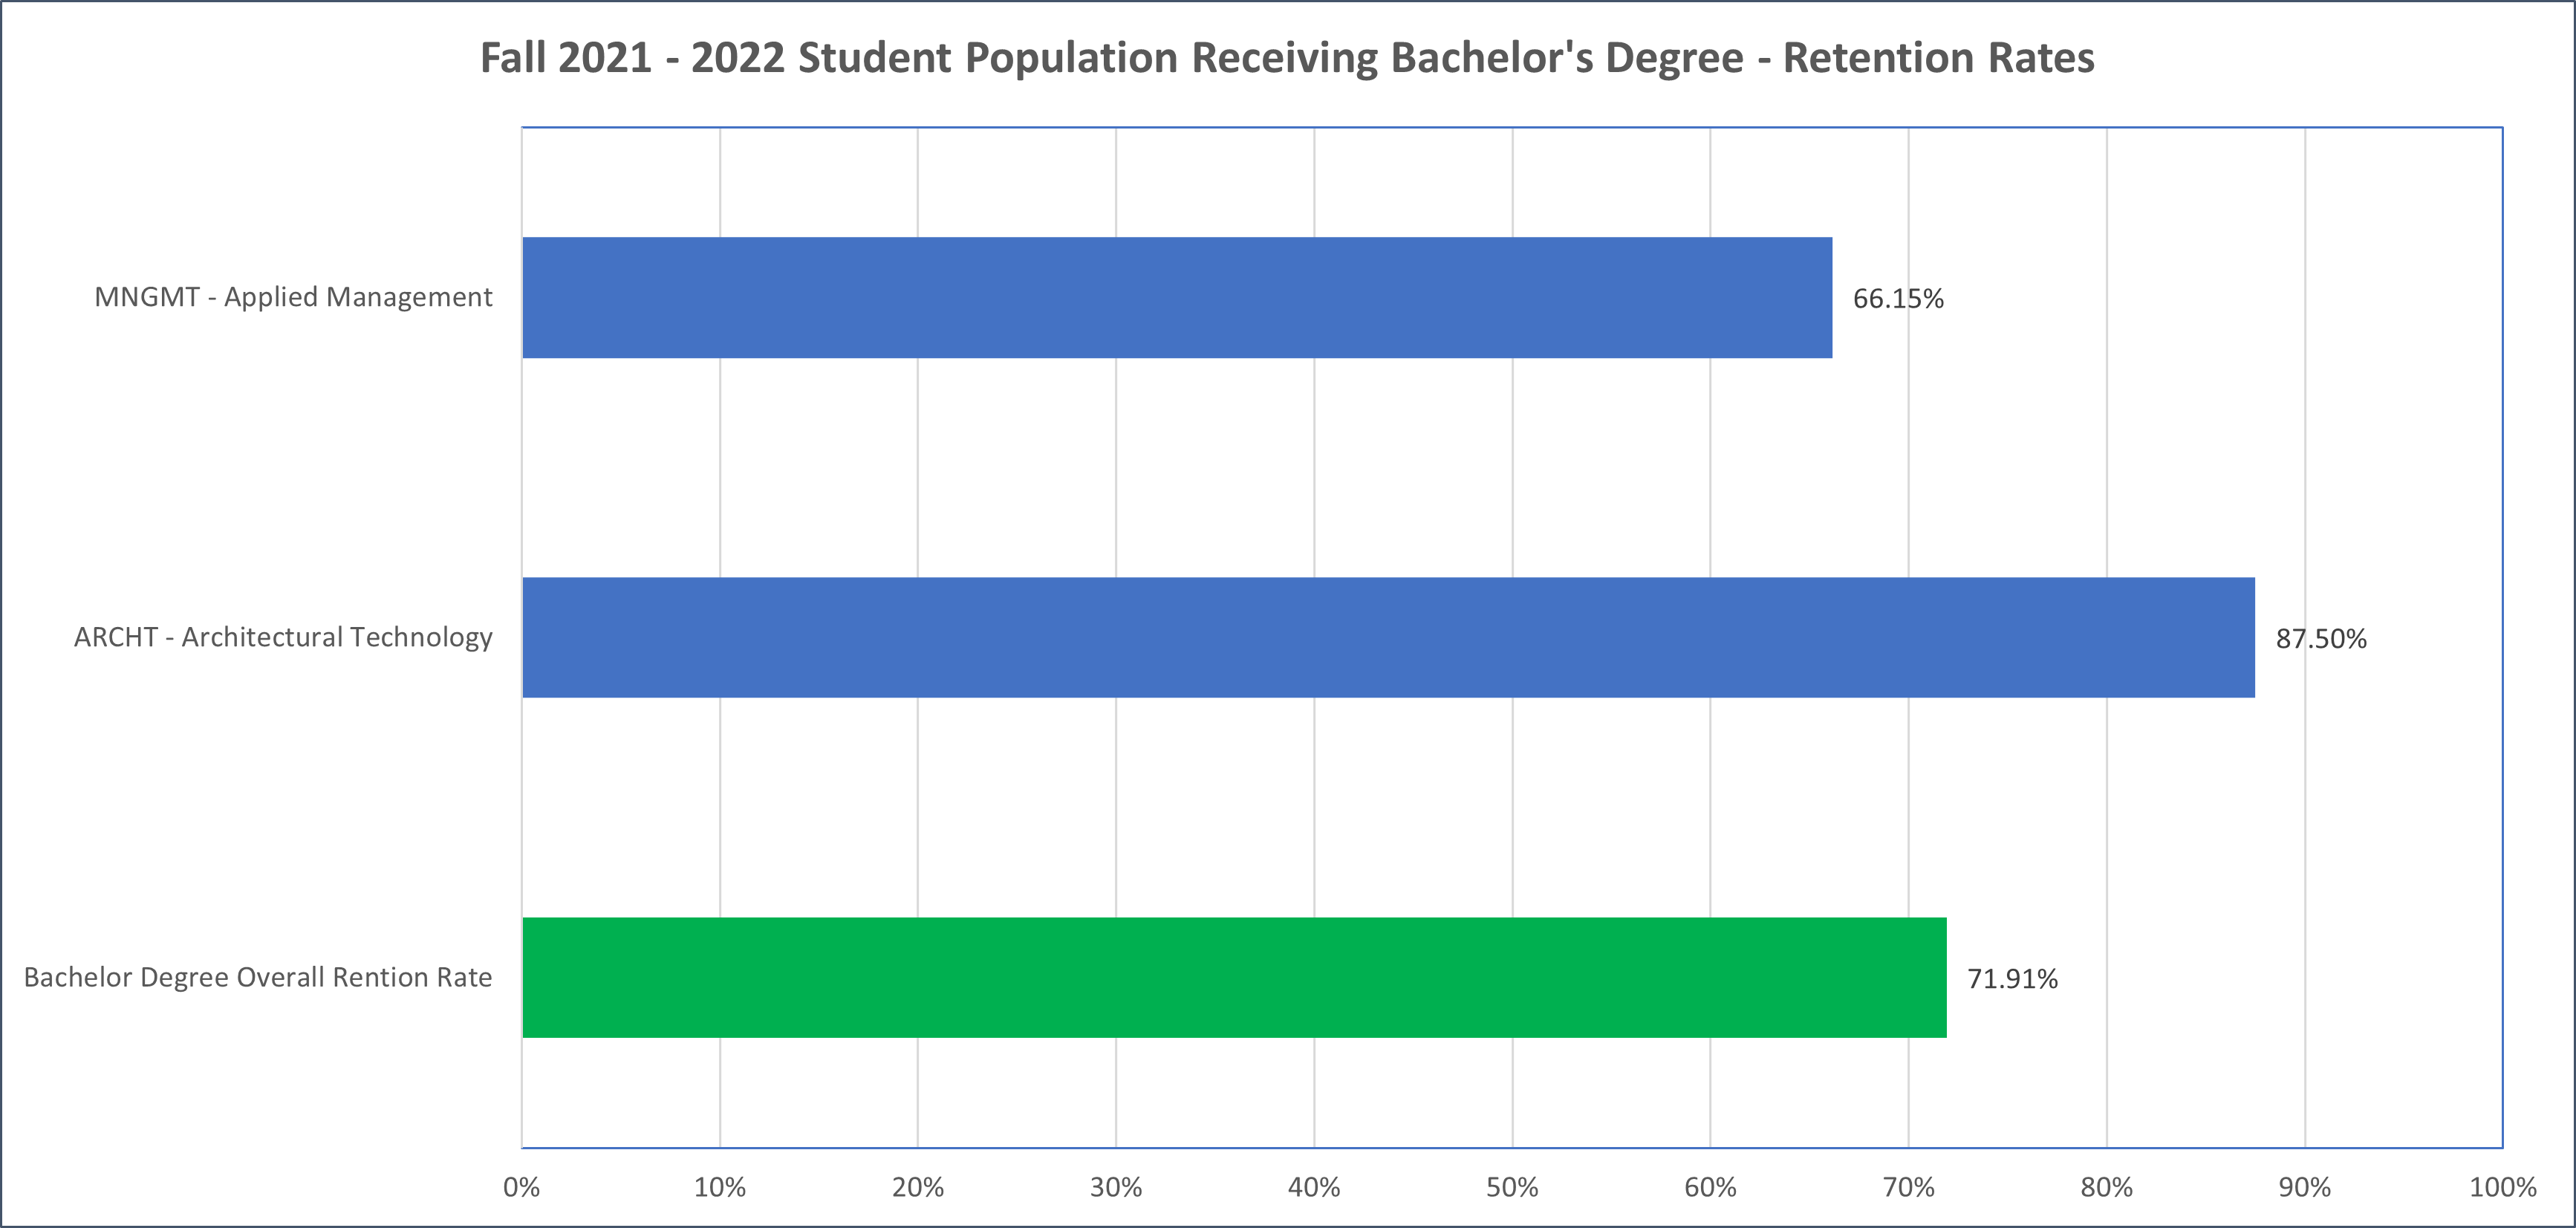 Fall 2021 - 2022 Student Population Receiving Bachelor's Degree - Retention Rates